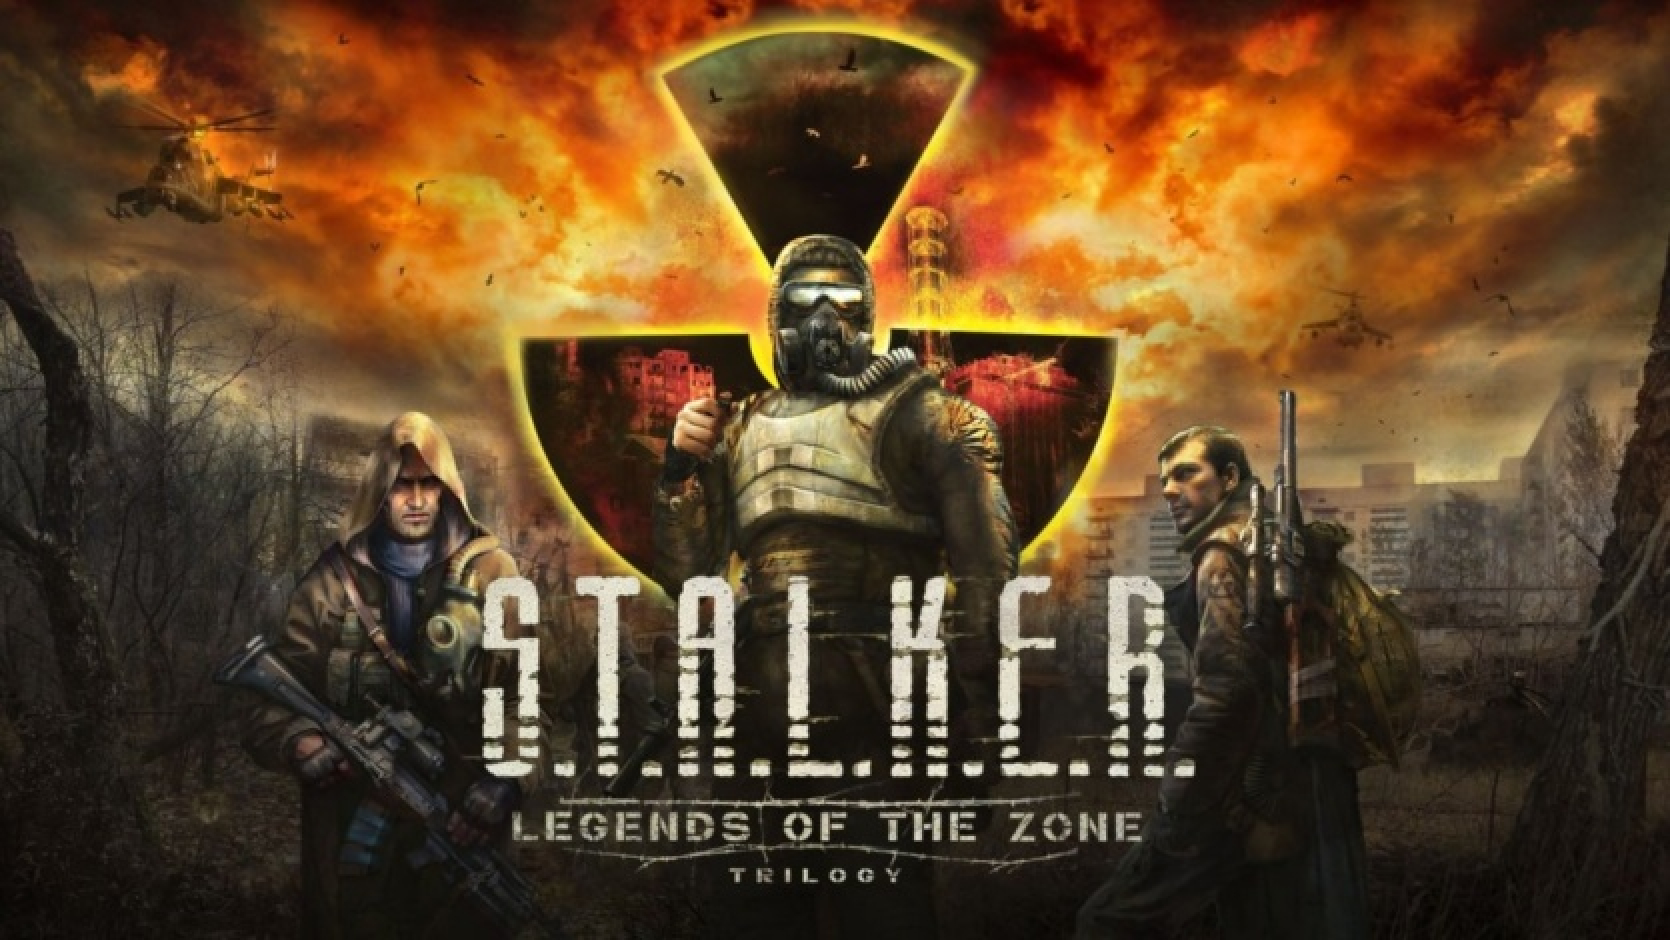 The original parts of S.T.A.L.K.E.R. will be re-released. At least in Japan